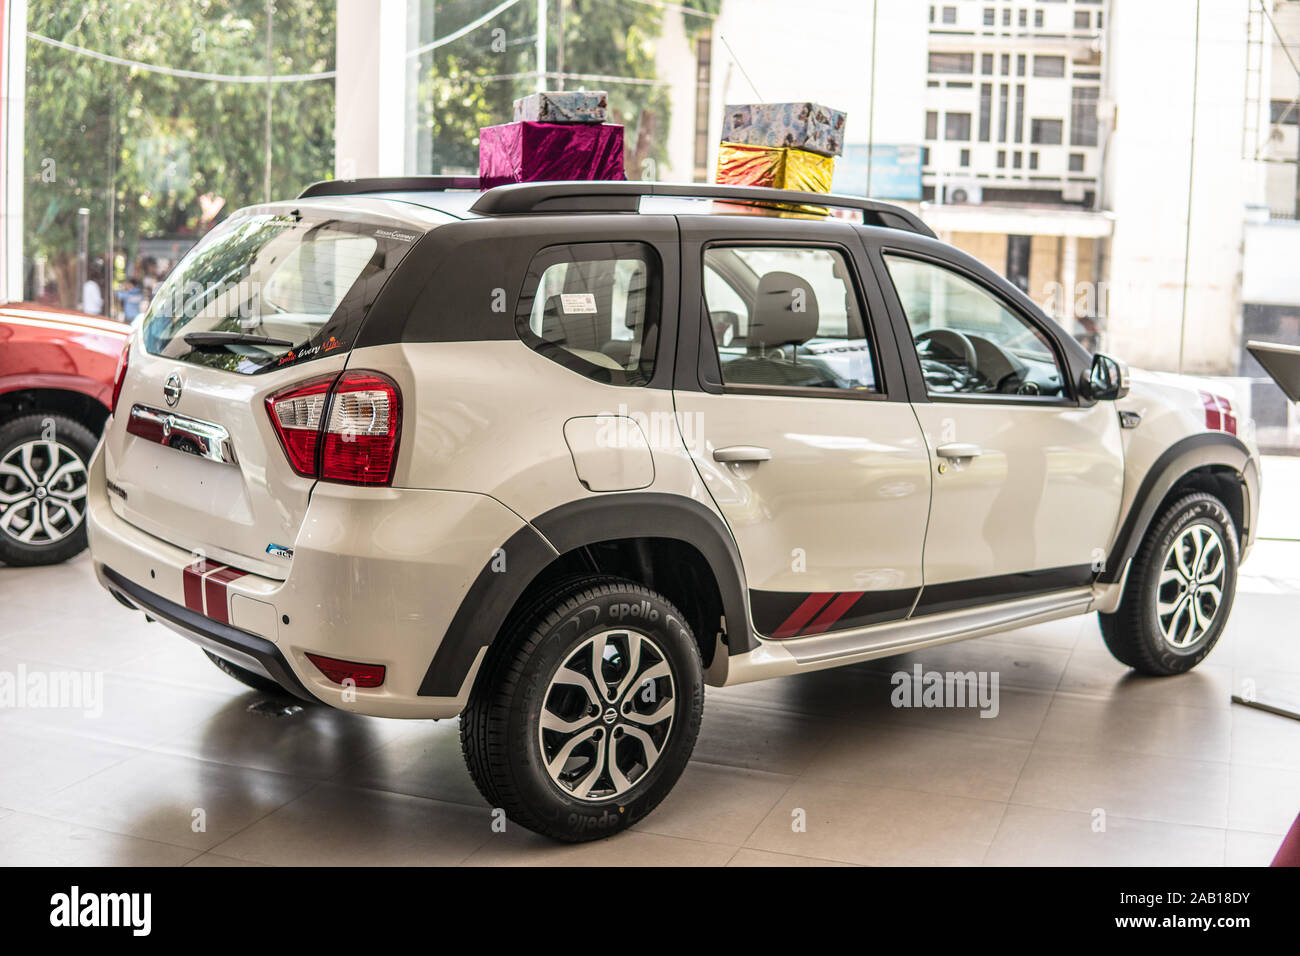 Bangalore, India, June 2018, Bengaluru city, Nissan Terrano Compact SUV manufactured by the Japanese automaker Nissan Stock Photo